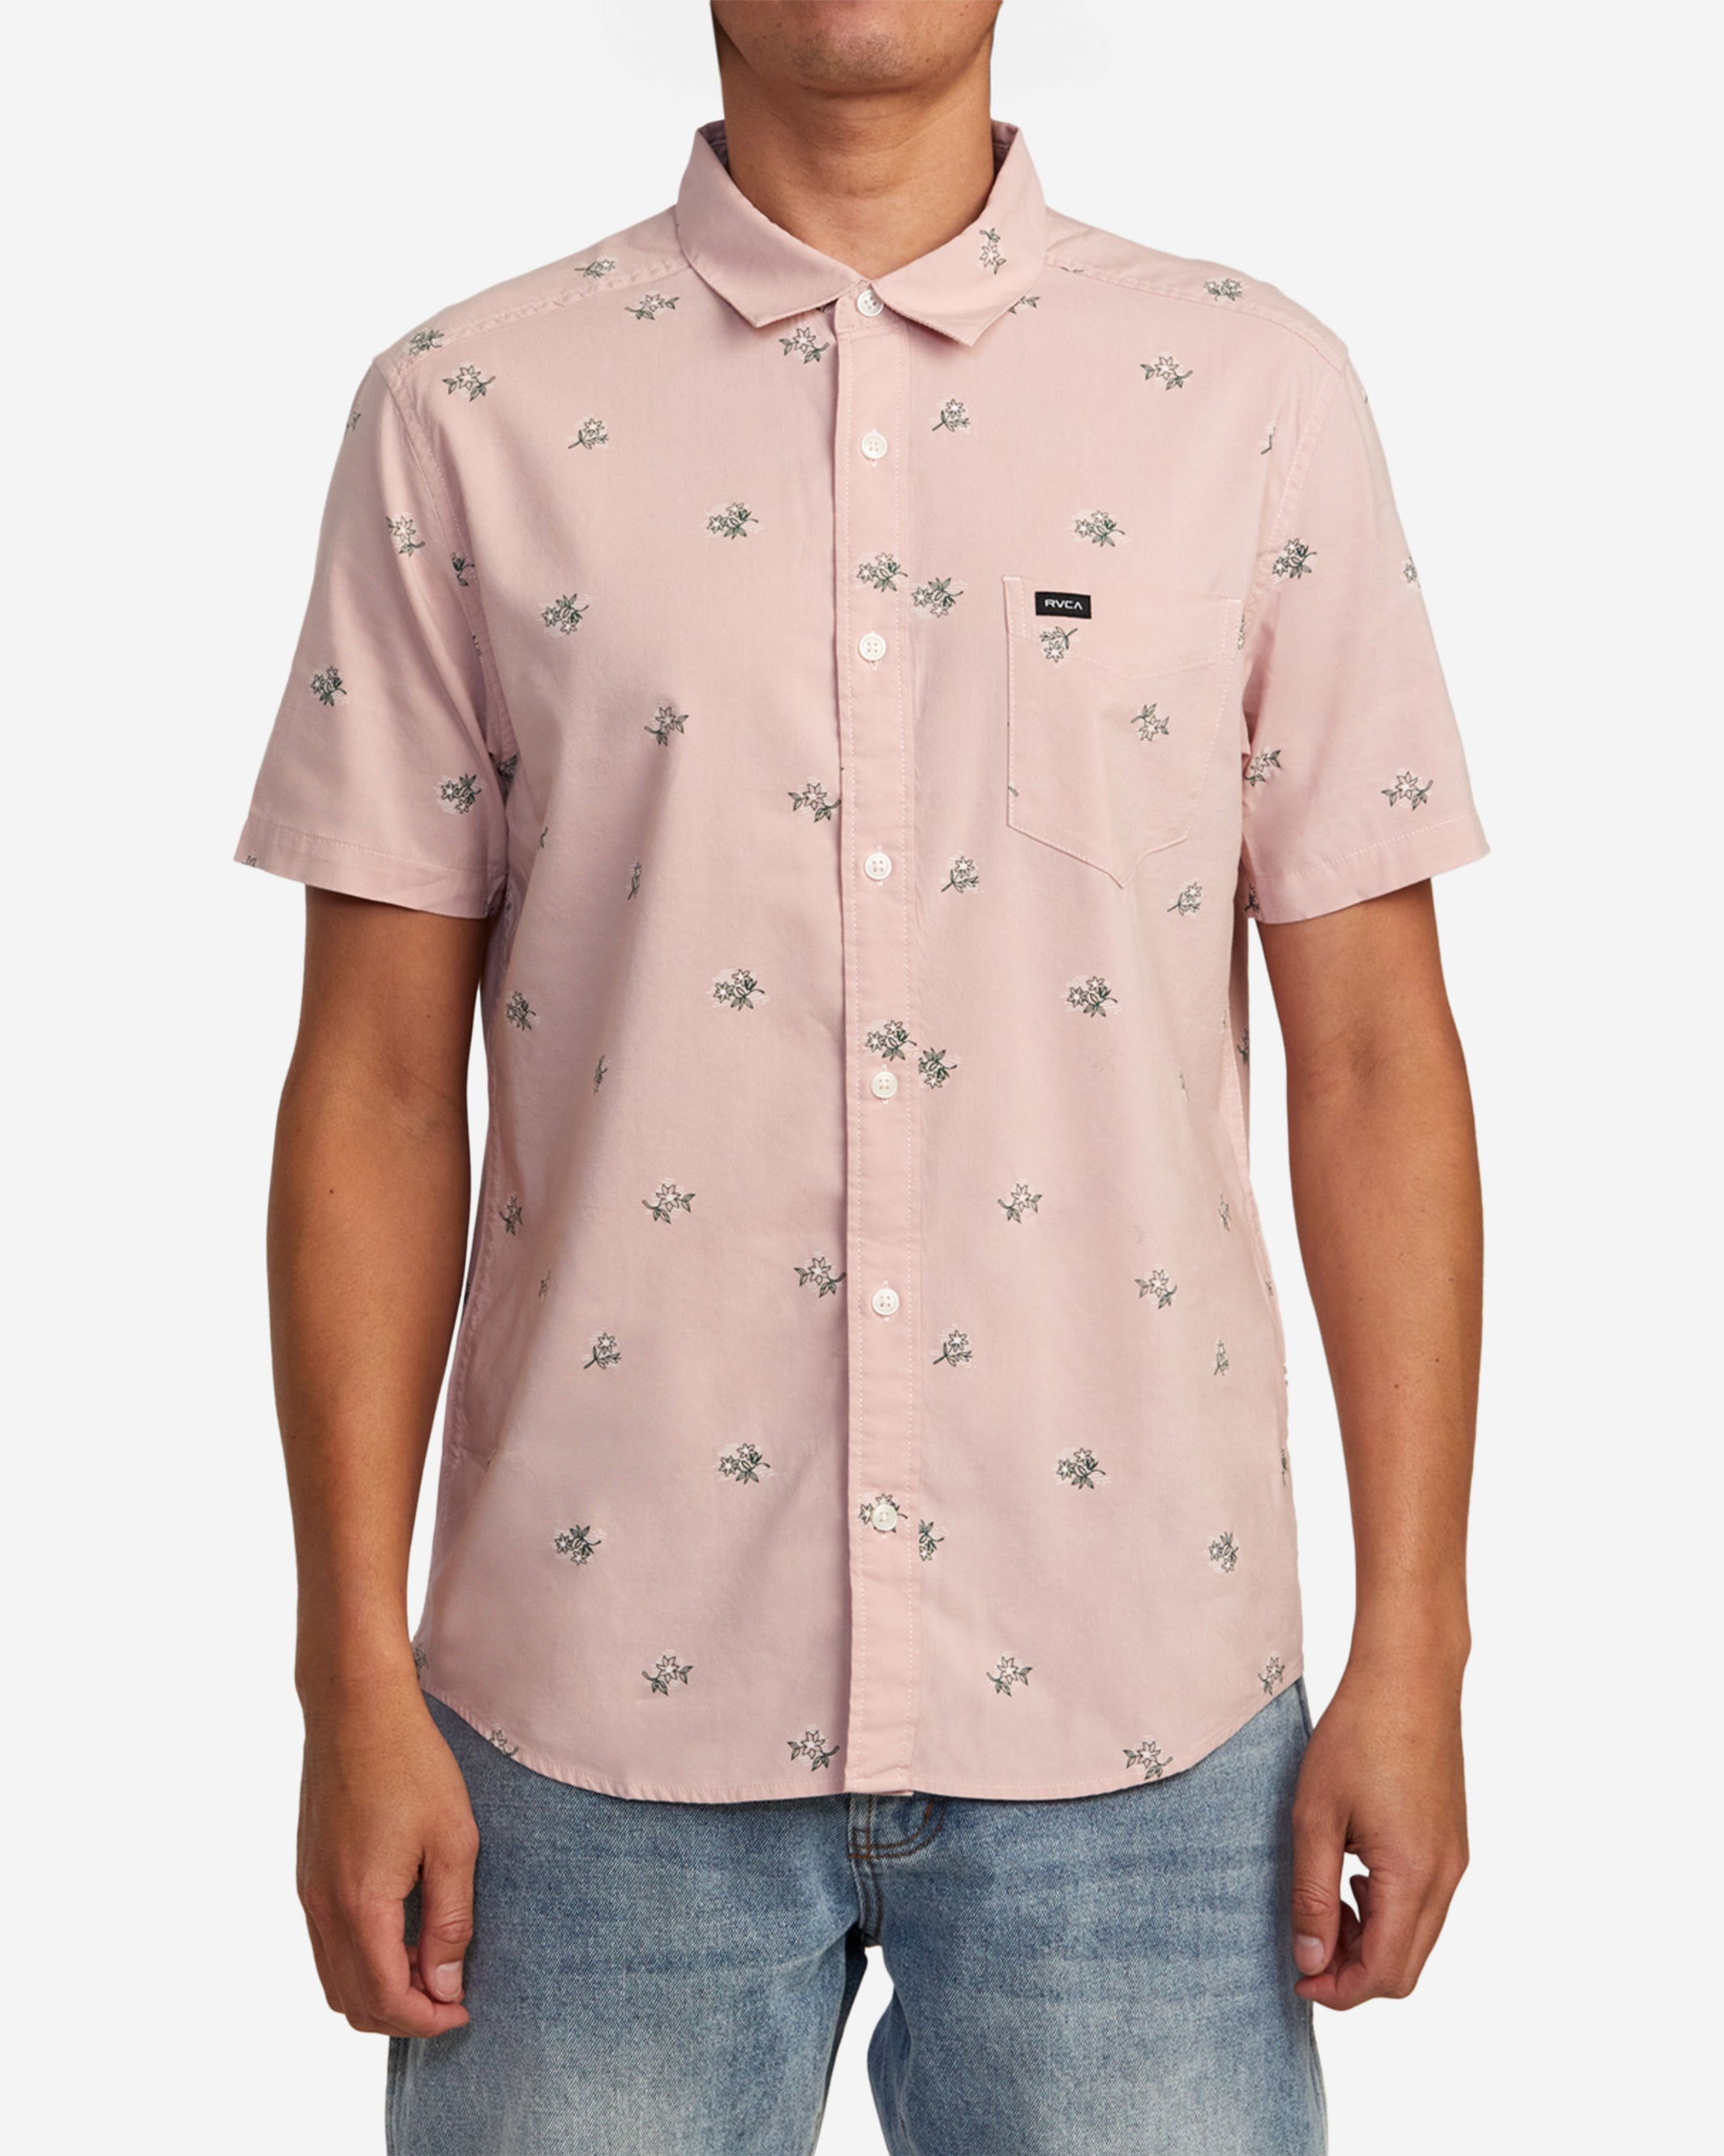 Elevating a classic silhouette with a floral print, this woven button-down shirt is made of cotton-viscose fabric in a regular fit with a chest pocket and a scalloped hem.